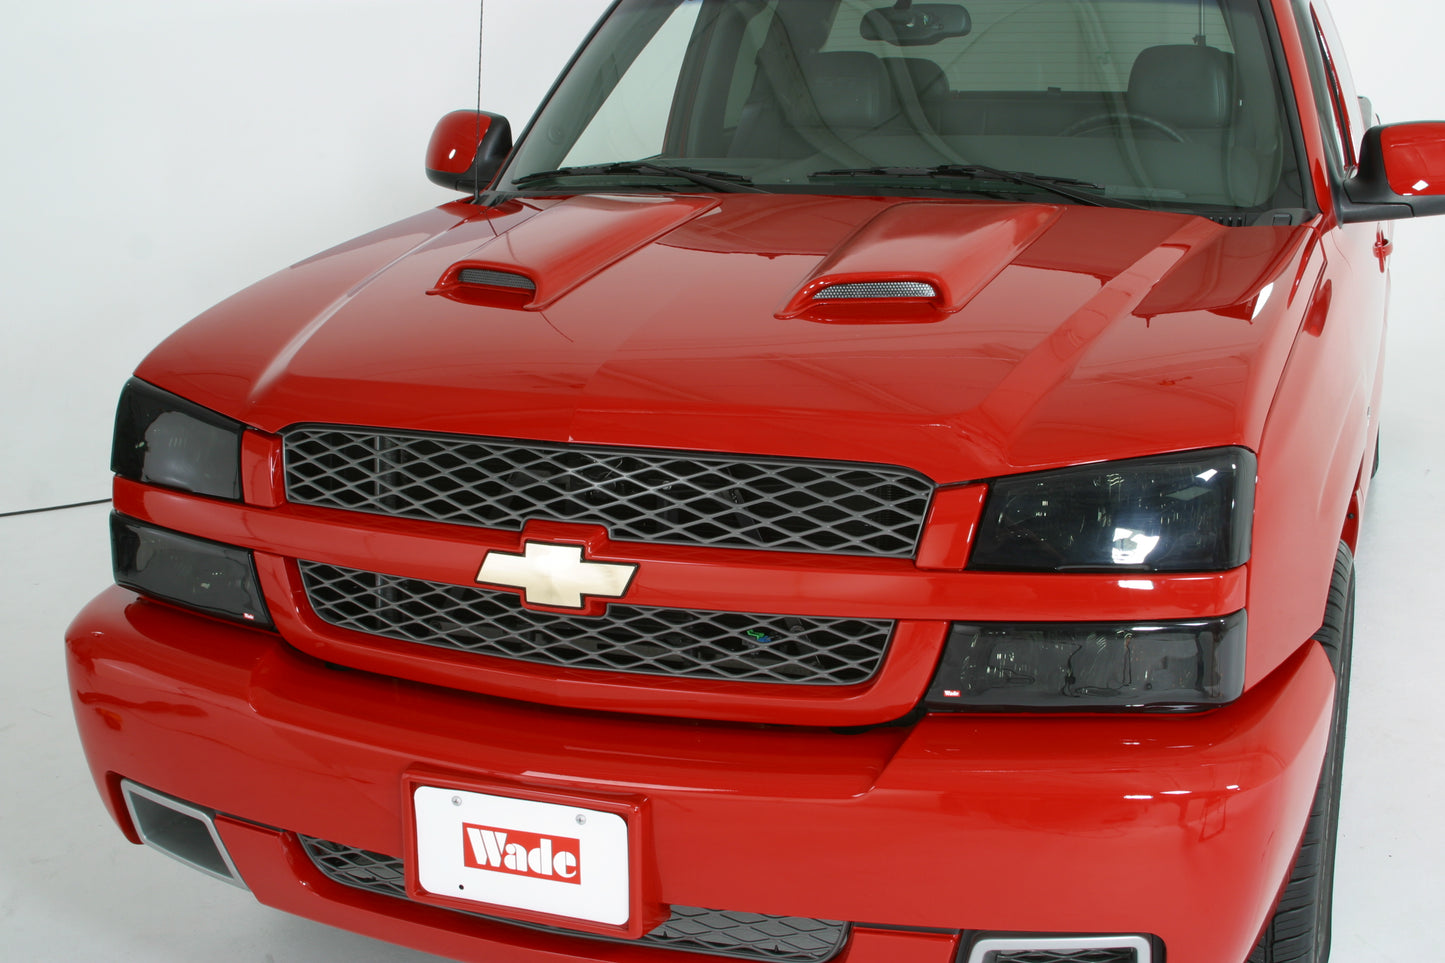 2000 Ford Mustang Head Light Covers